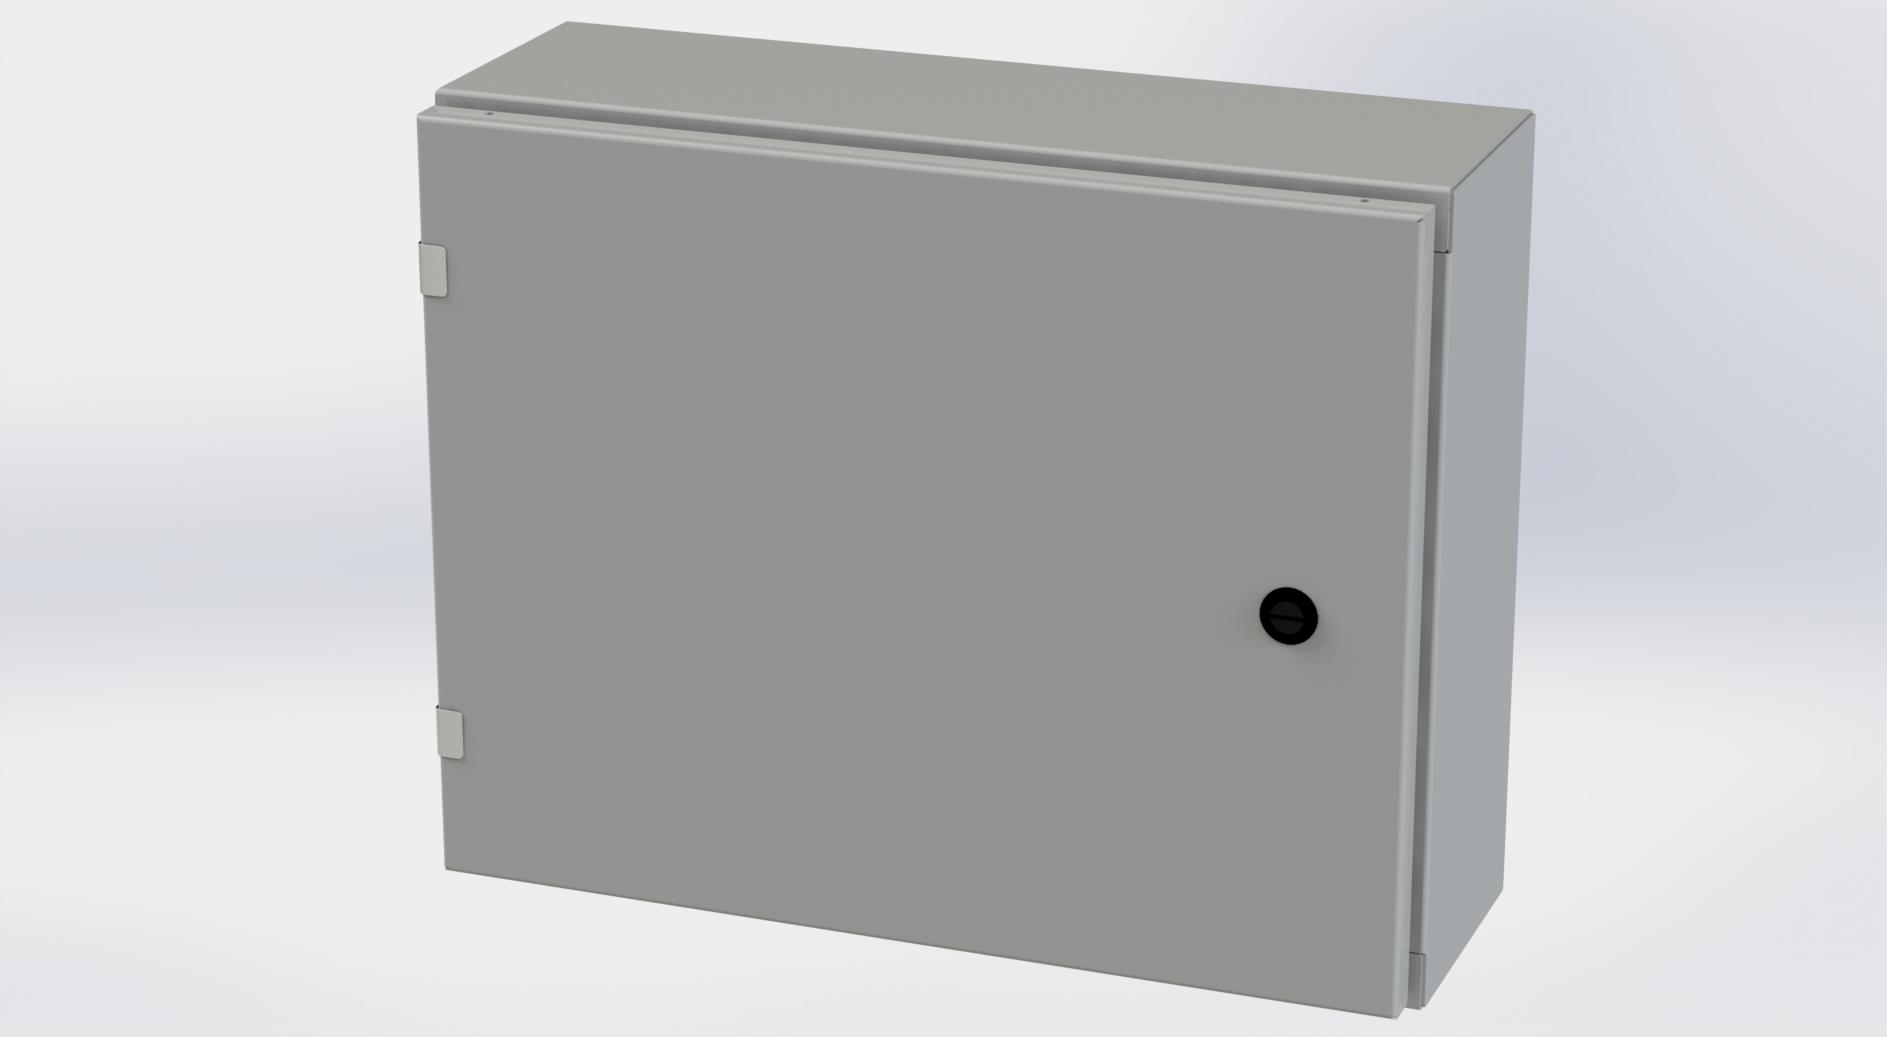 Saginaw Control SCE-16EL2006LP EL Enclosure, Height:16.00", Width:20.00", Depth:6.00", ANSI-61 gray powder coating inside and out. Optional sub-panels are powder coated white.